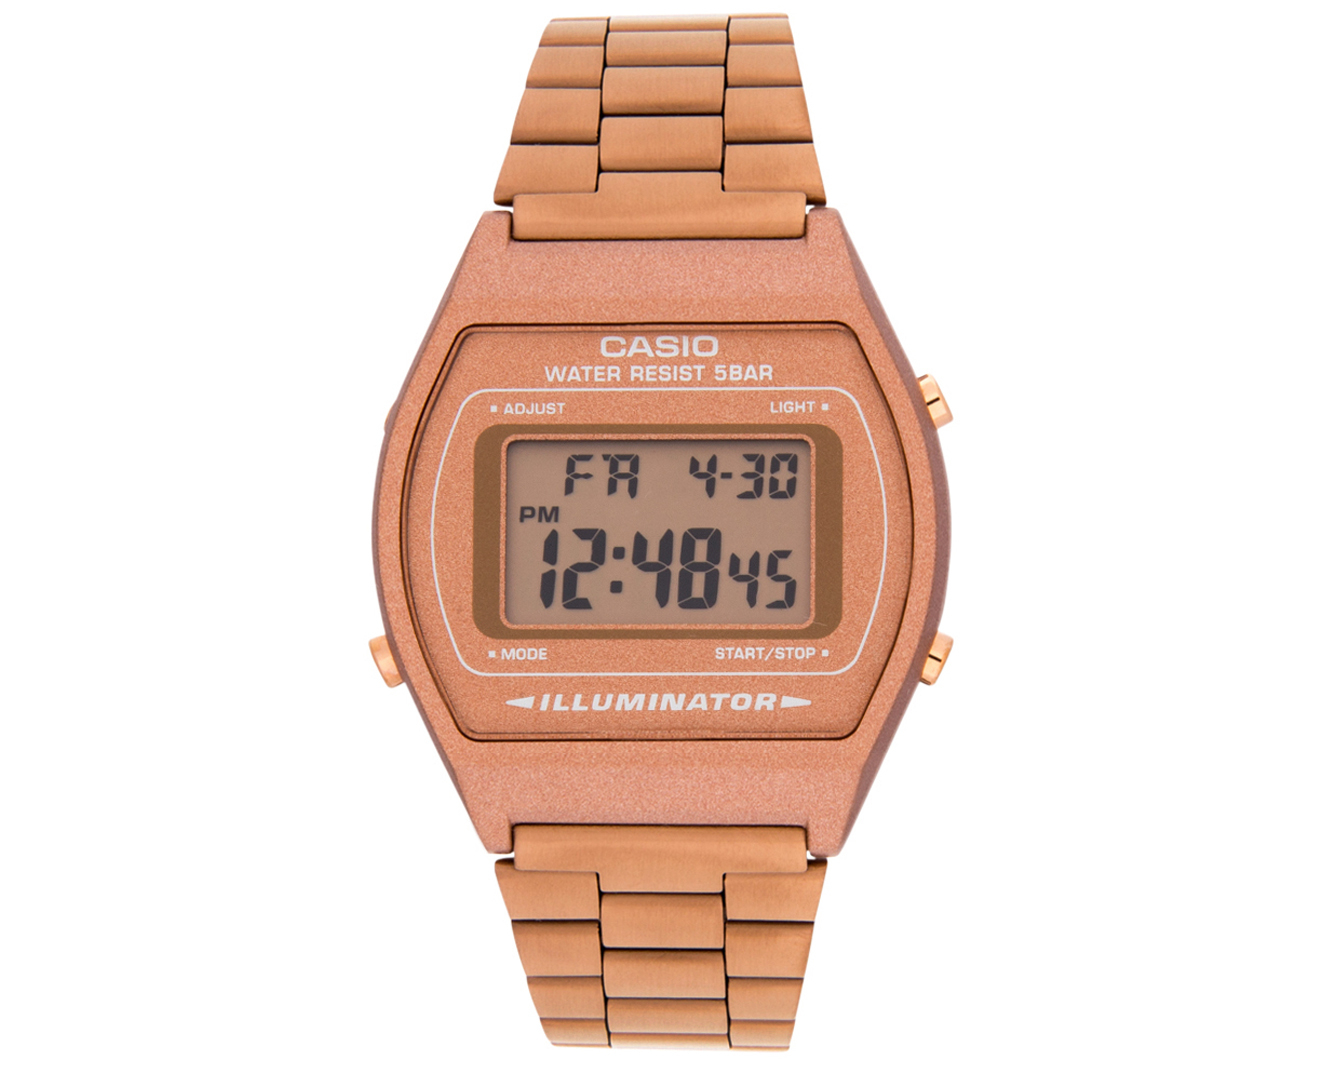 Casio Men's 35mm B640WC-5AD Stainless Steel Watch - Rose Gold | Catch.co.nz